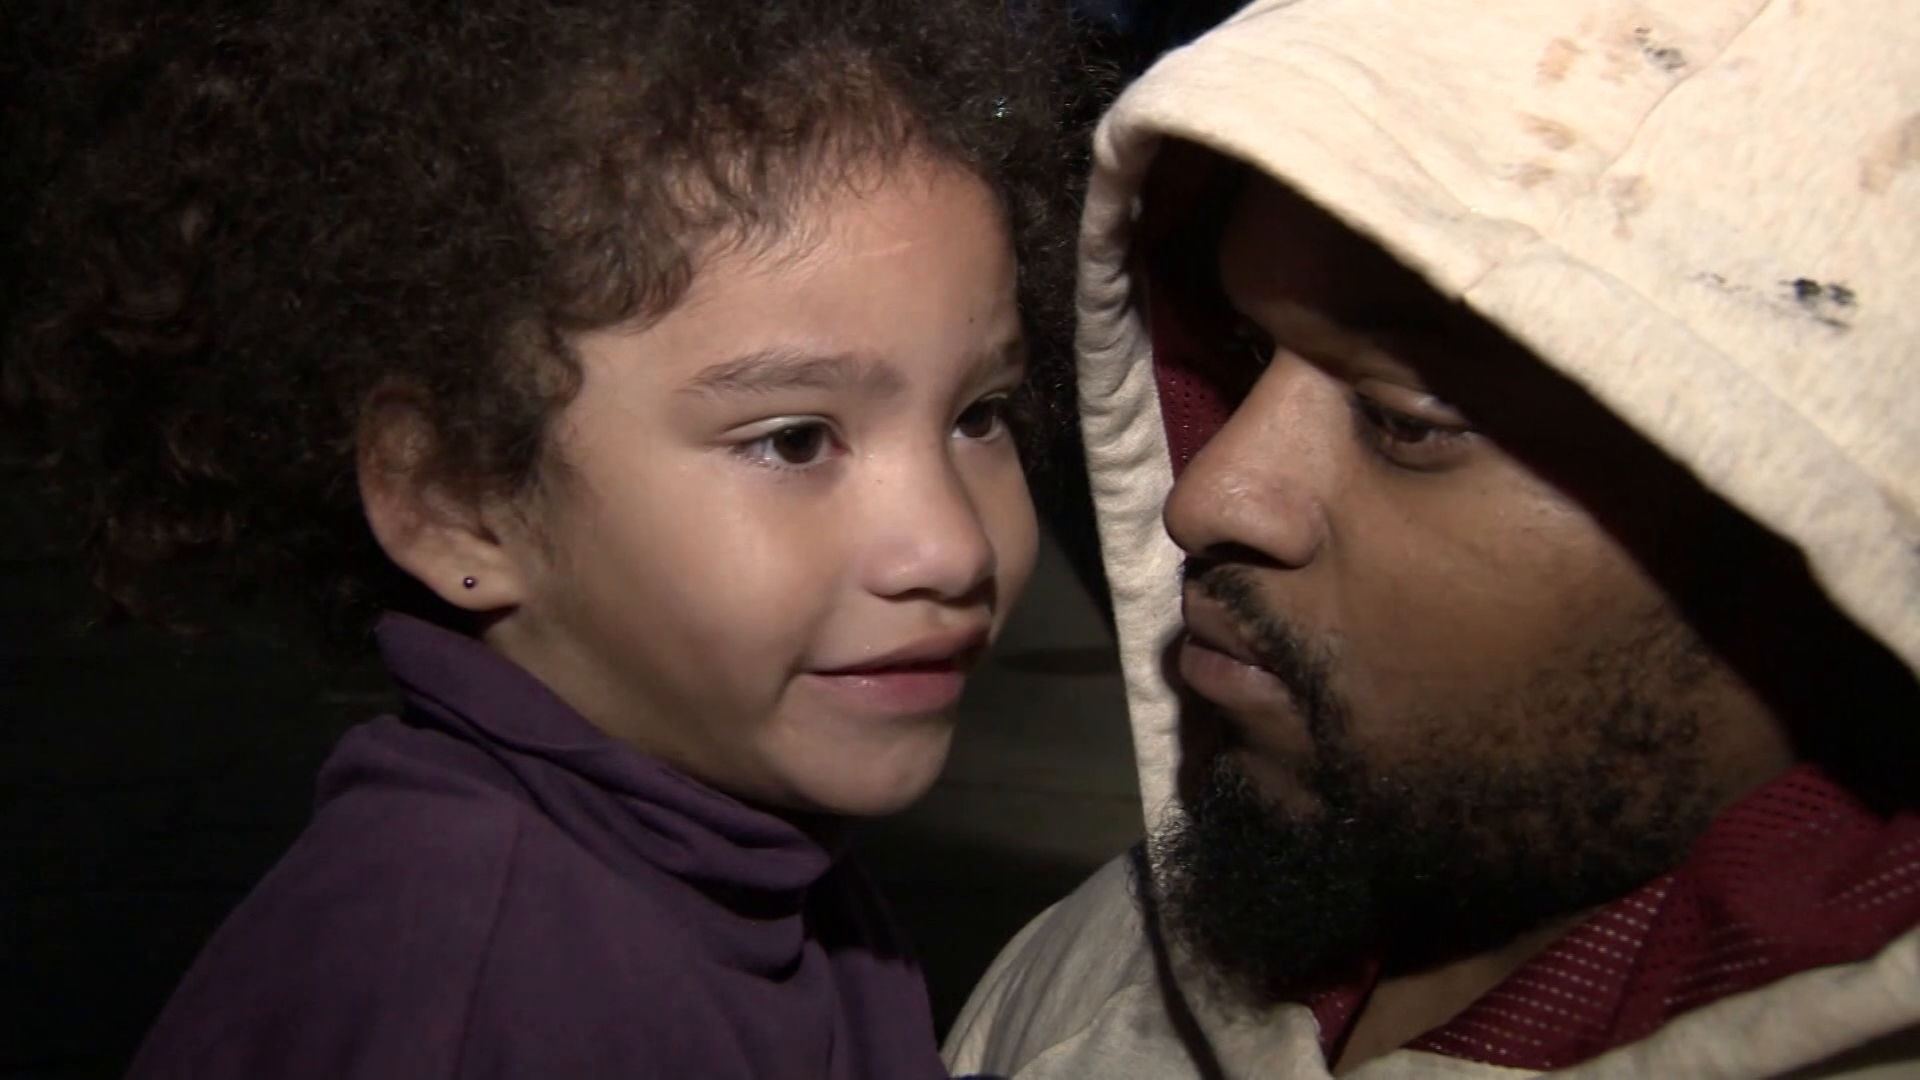 5-year-old girl describes saving family from house fire